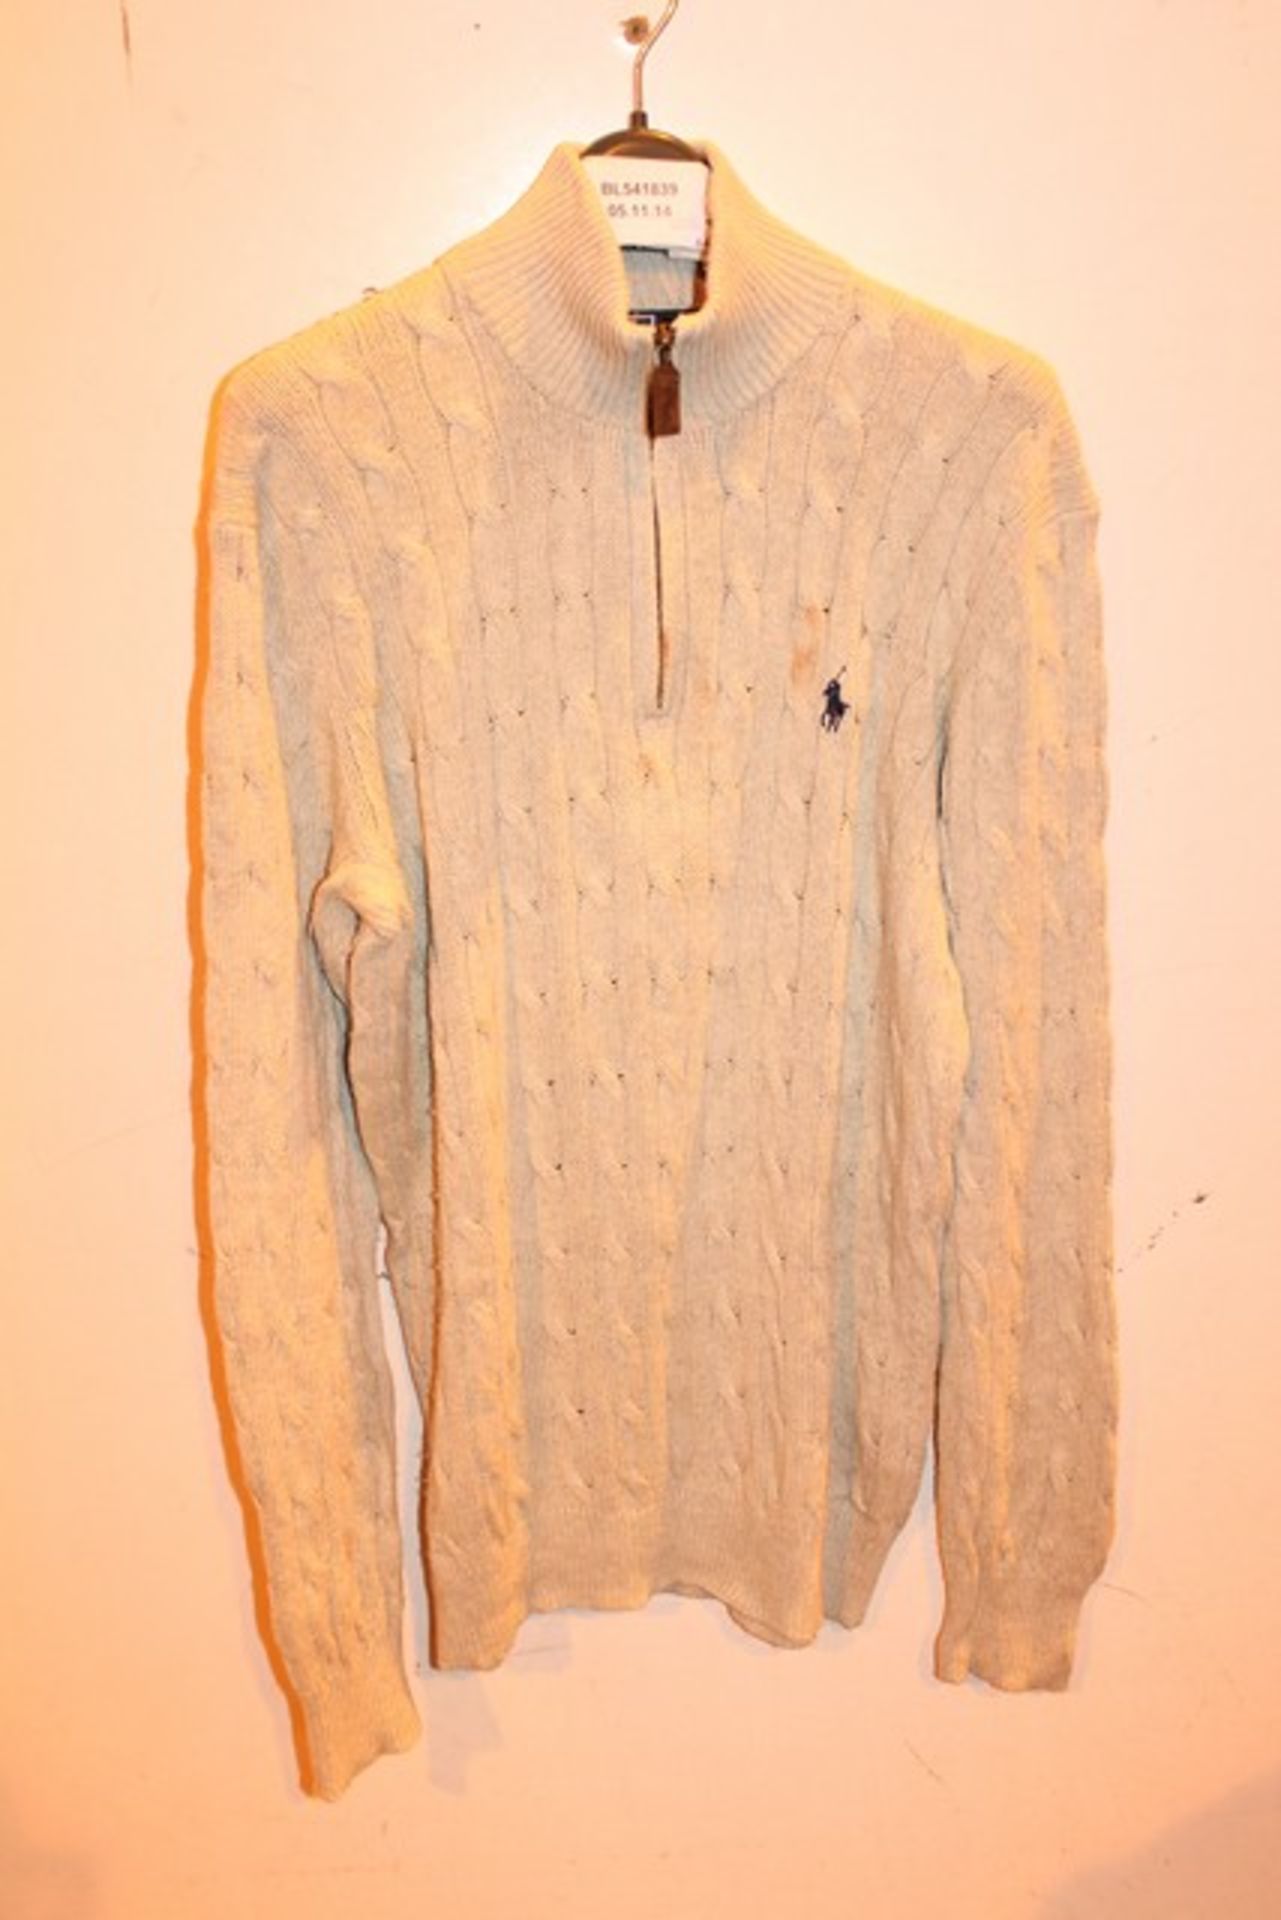 1 x SIZE MEDIUM POLO RALPH LAUREN KNITTED JUMPER (541839)   *PLEASE NOTE THAT THE BID PRICE IS